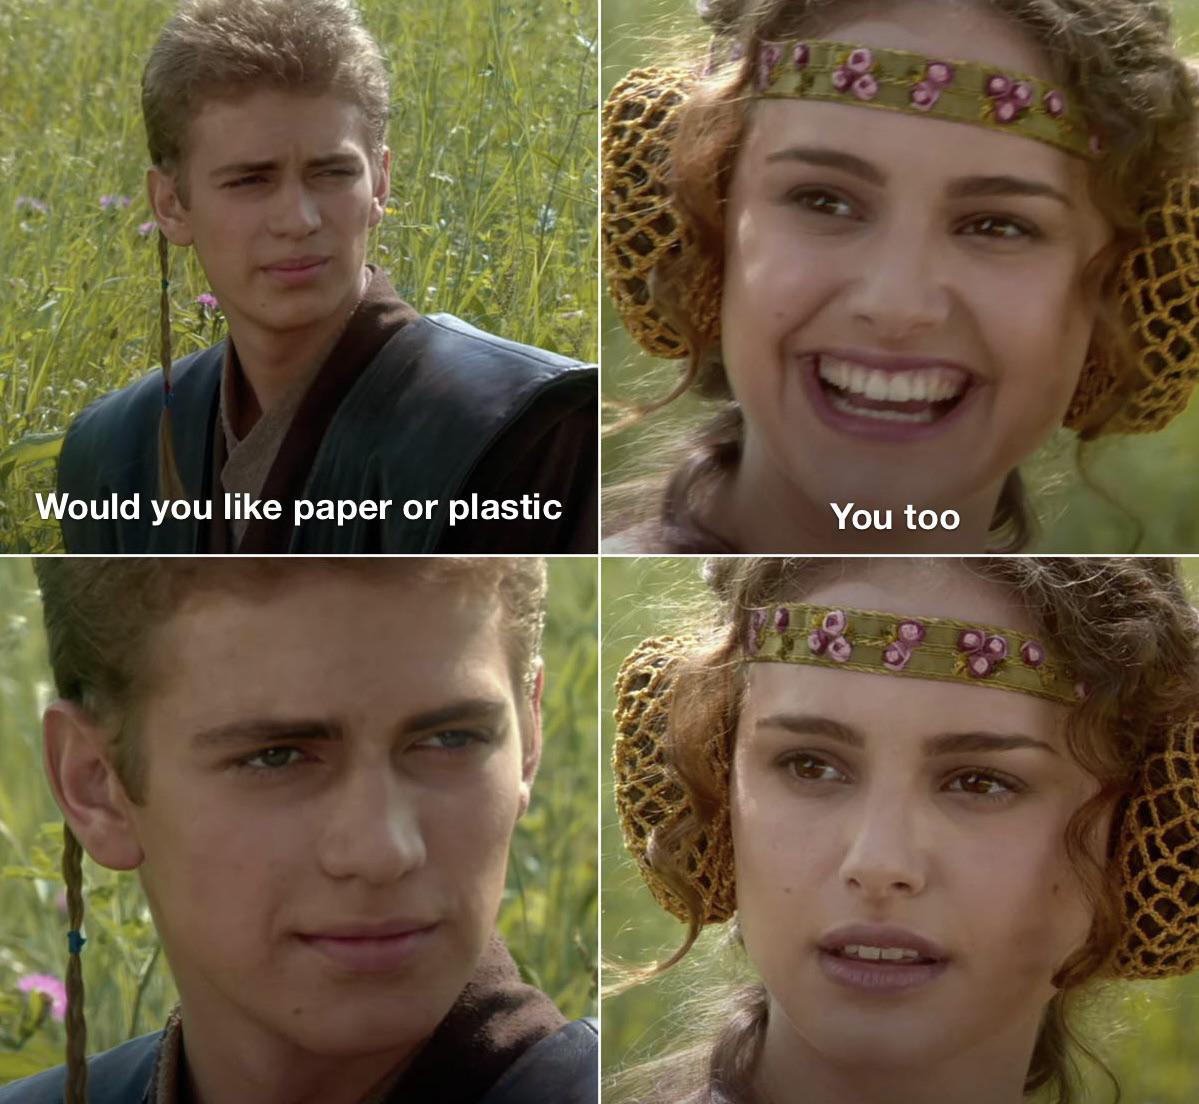 dank memes - funny memes - meme right - Would you paper or plastic You too